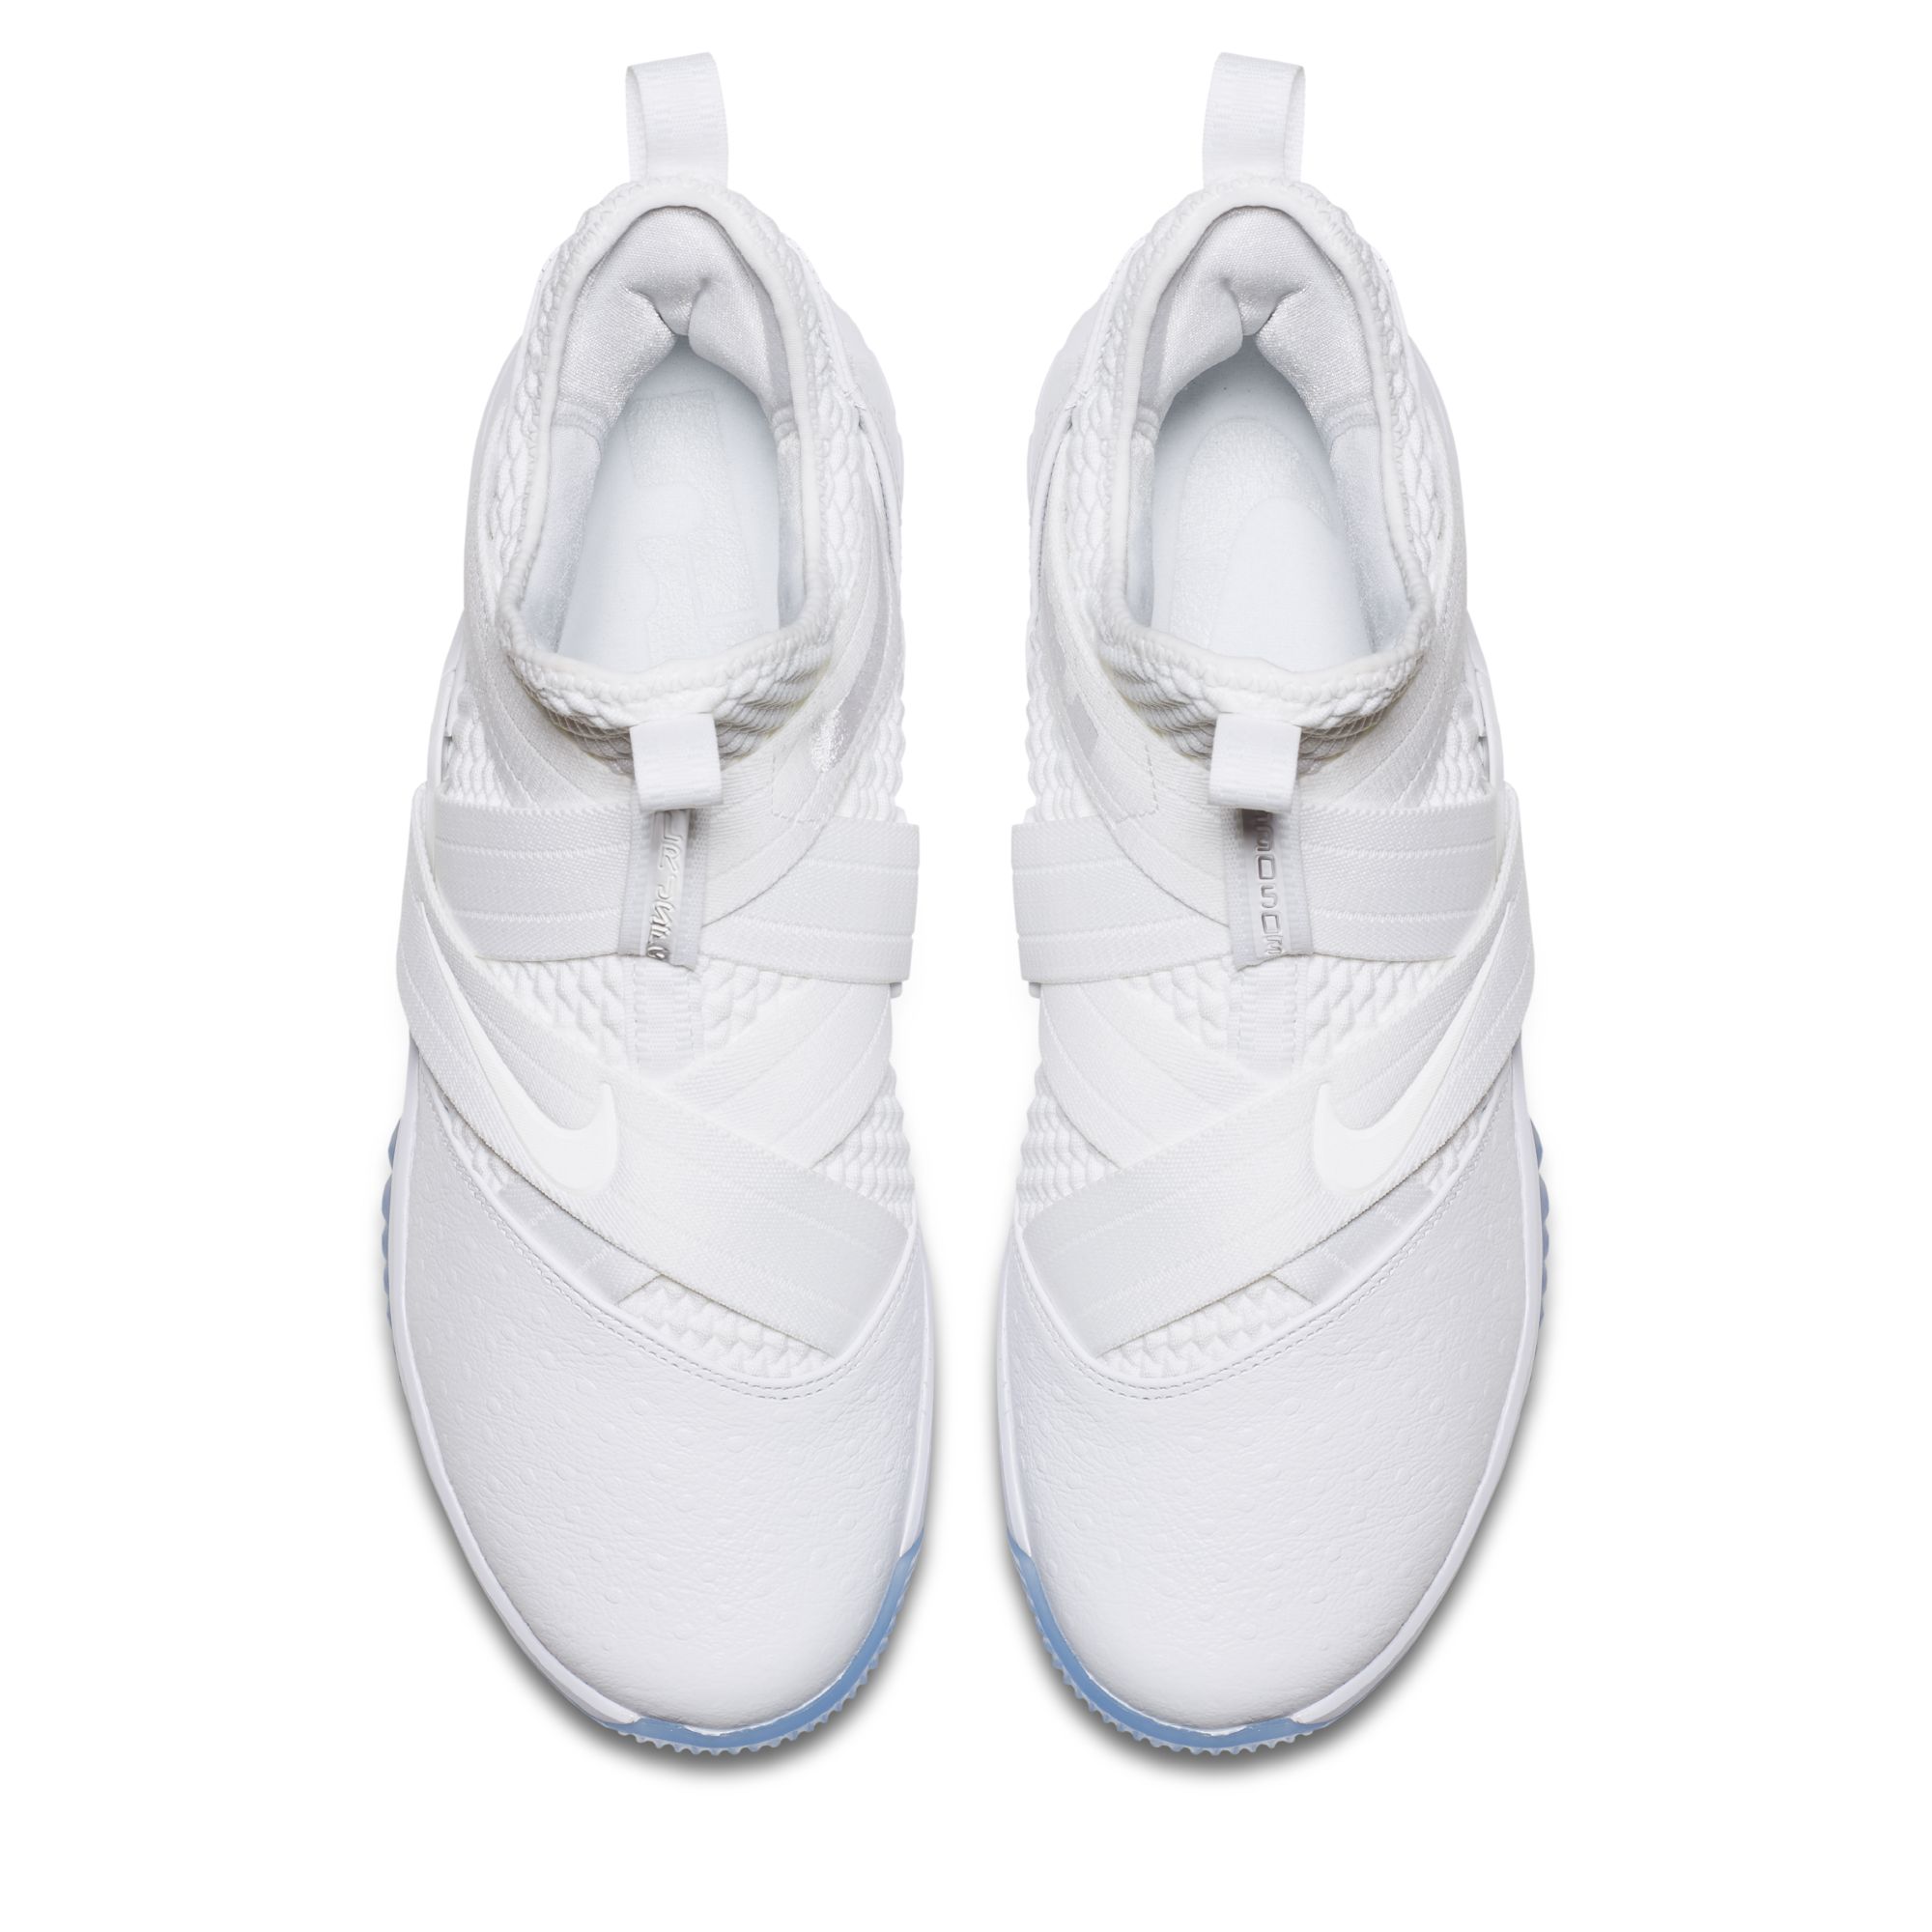 lebron soldier 12 all white